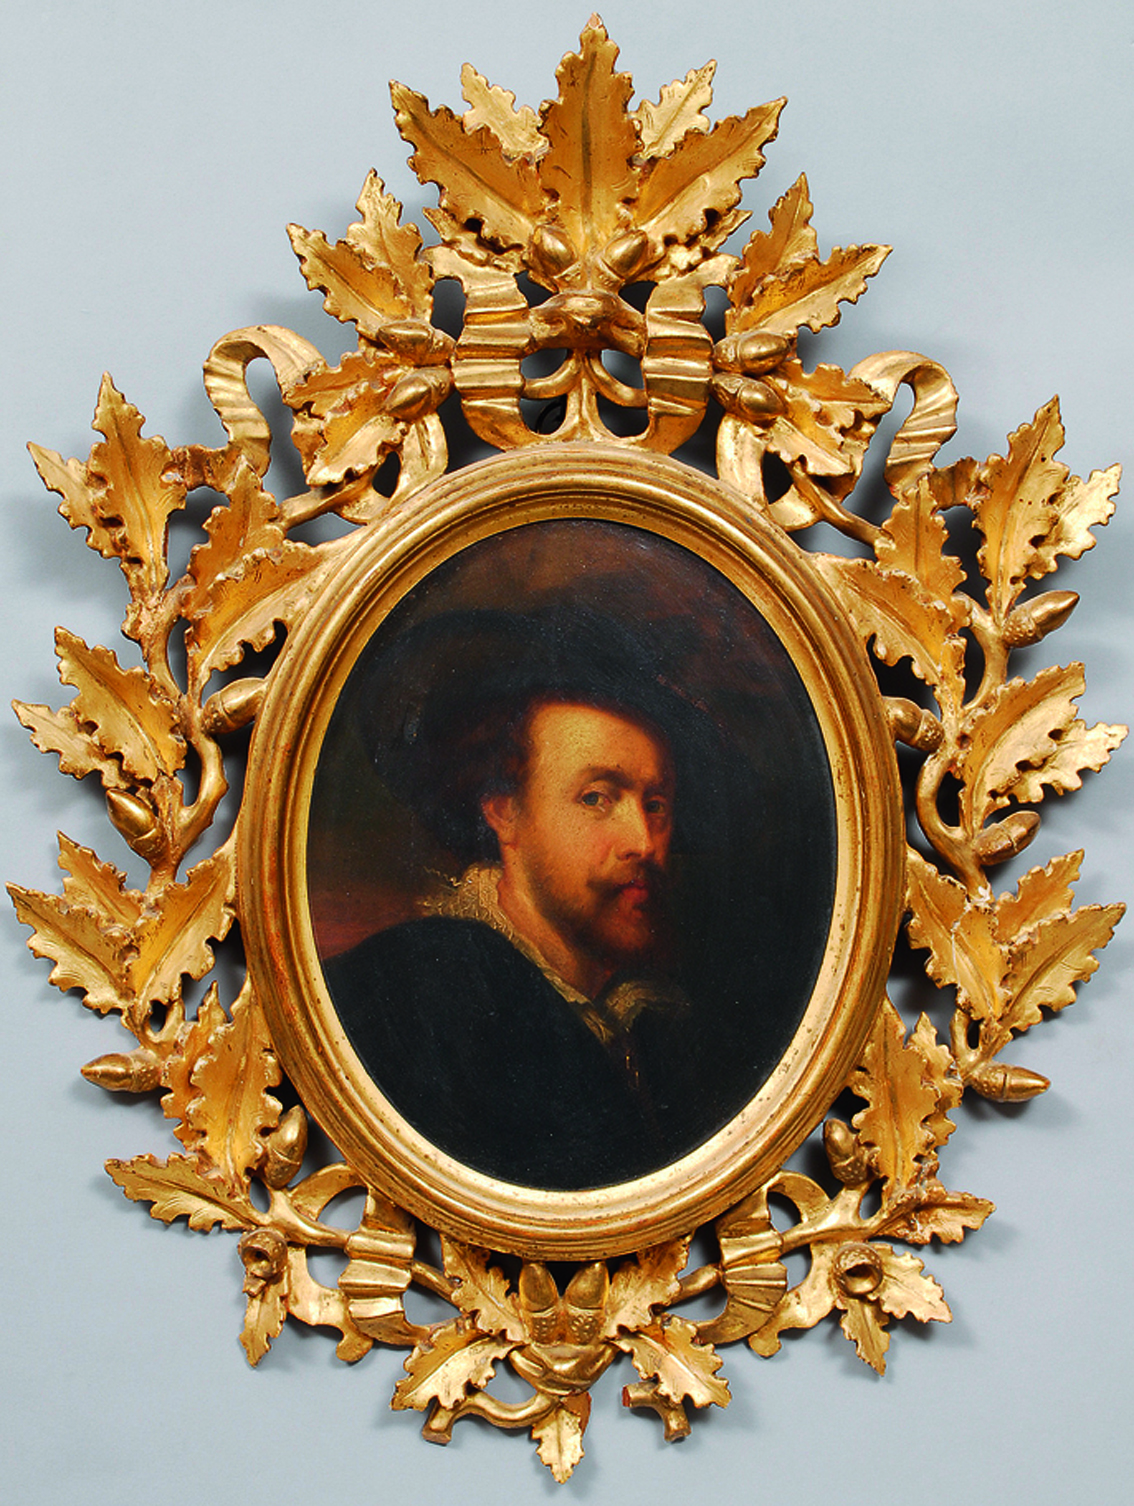 A copy after the self portrait of Rubens at Windsor castle